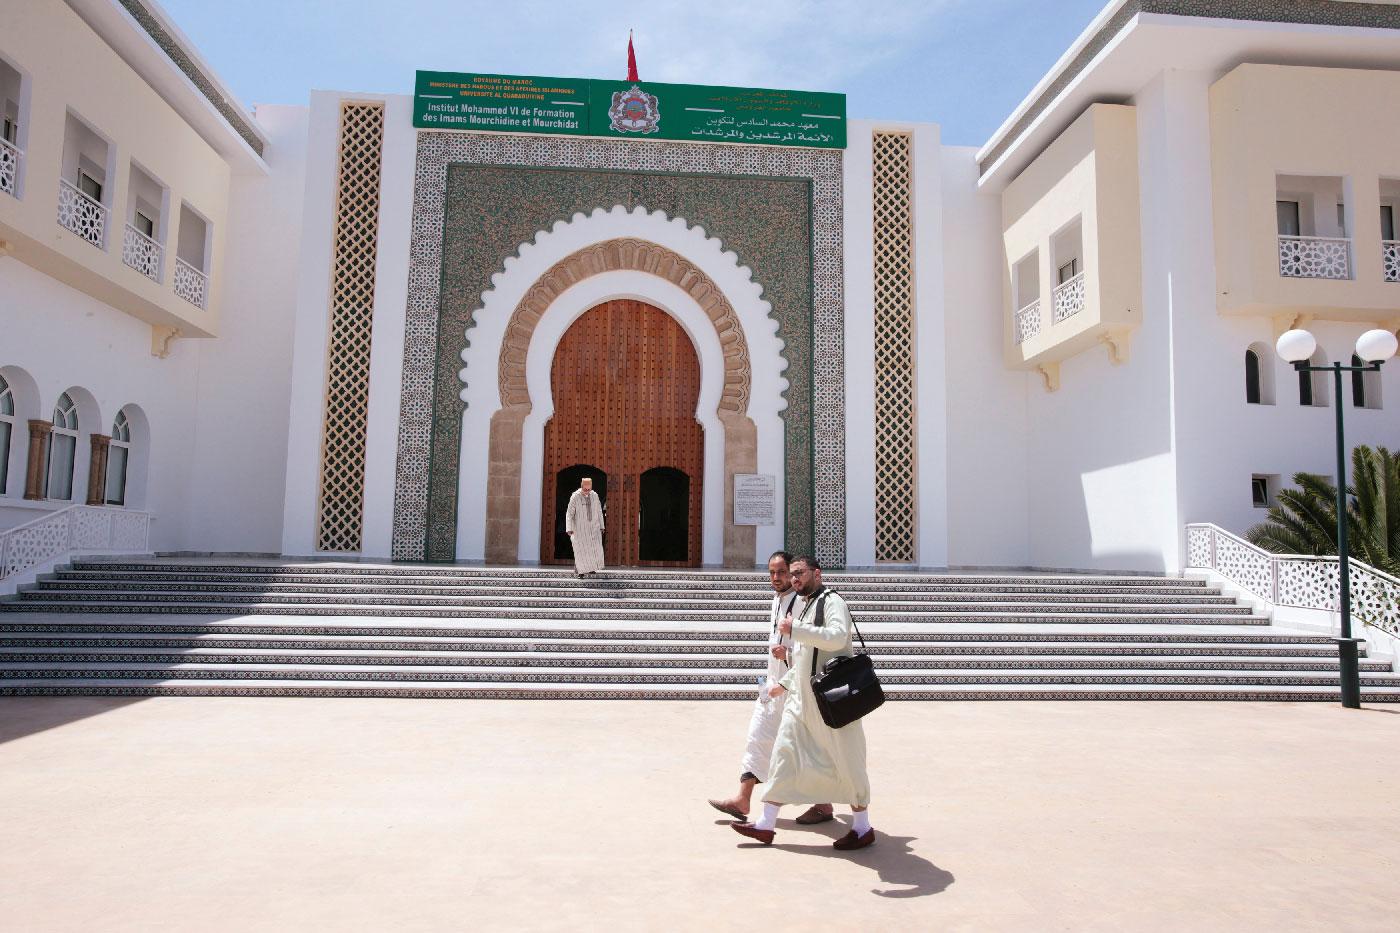 Mohammed VI Institute for training Imams is pictured in Rabat